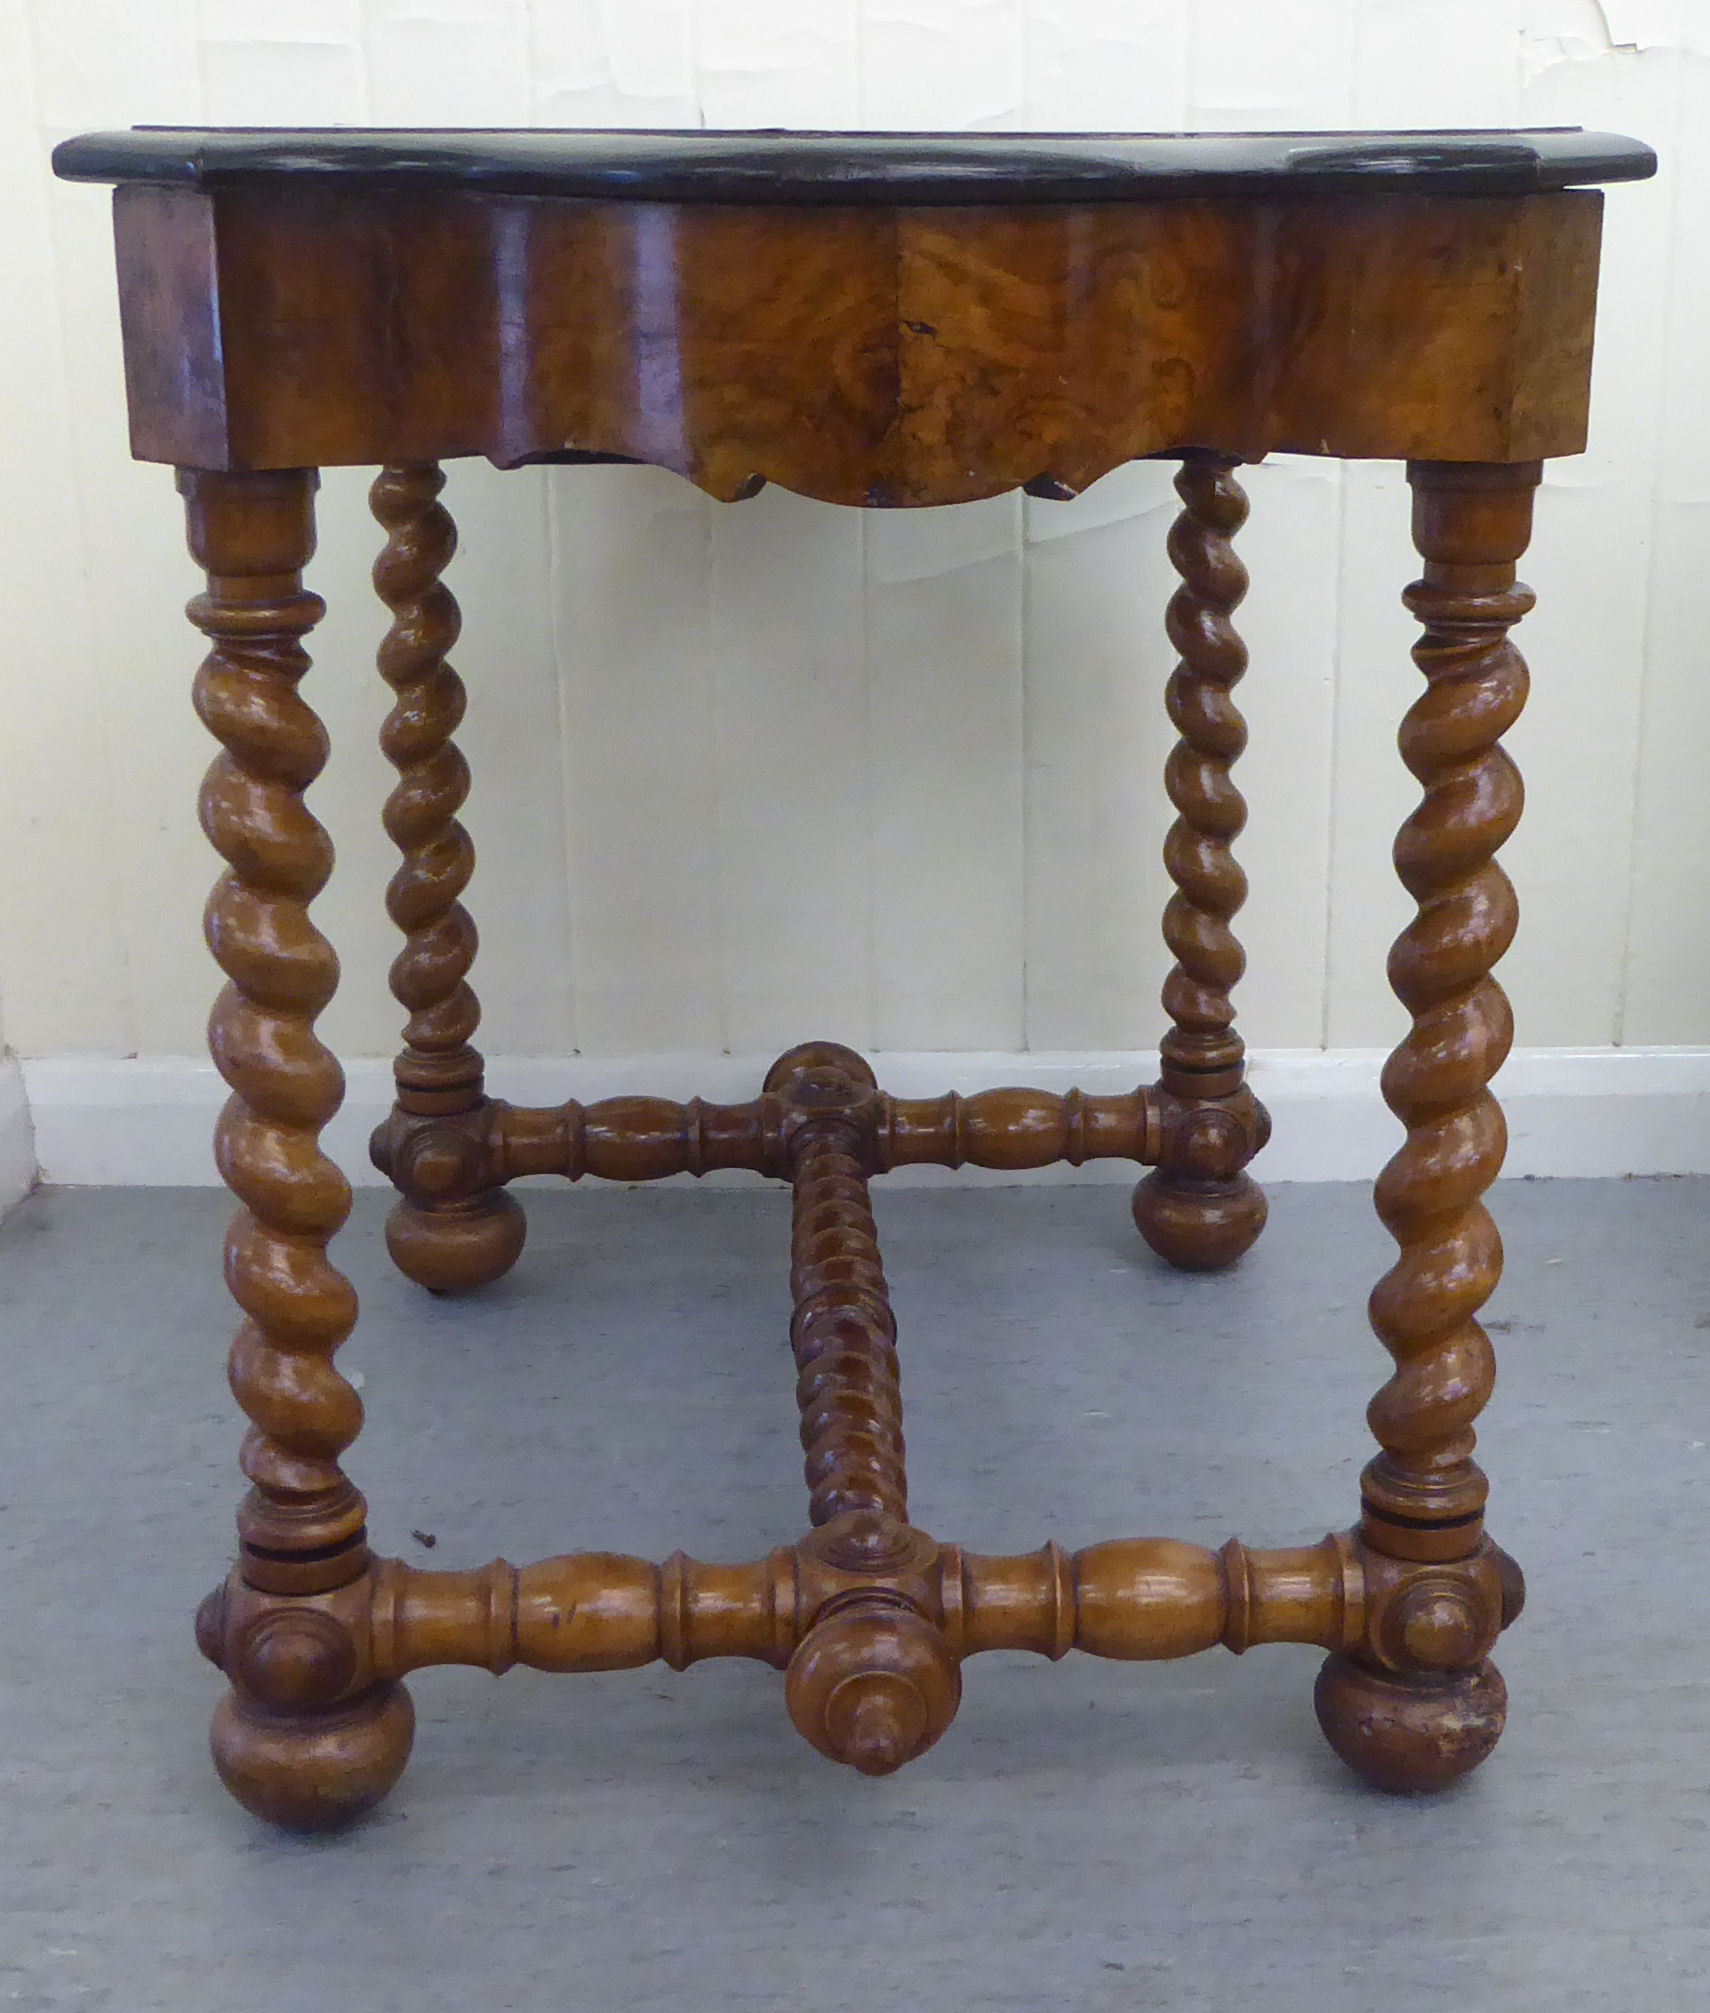 A late 19thC Continental figured walnut and floral marquetry games table with a serpentine - Image 7 of 12